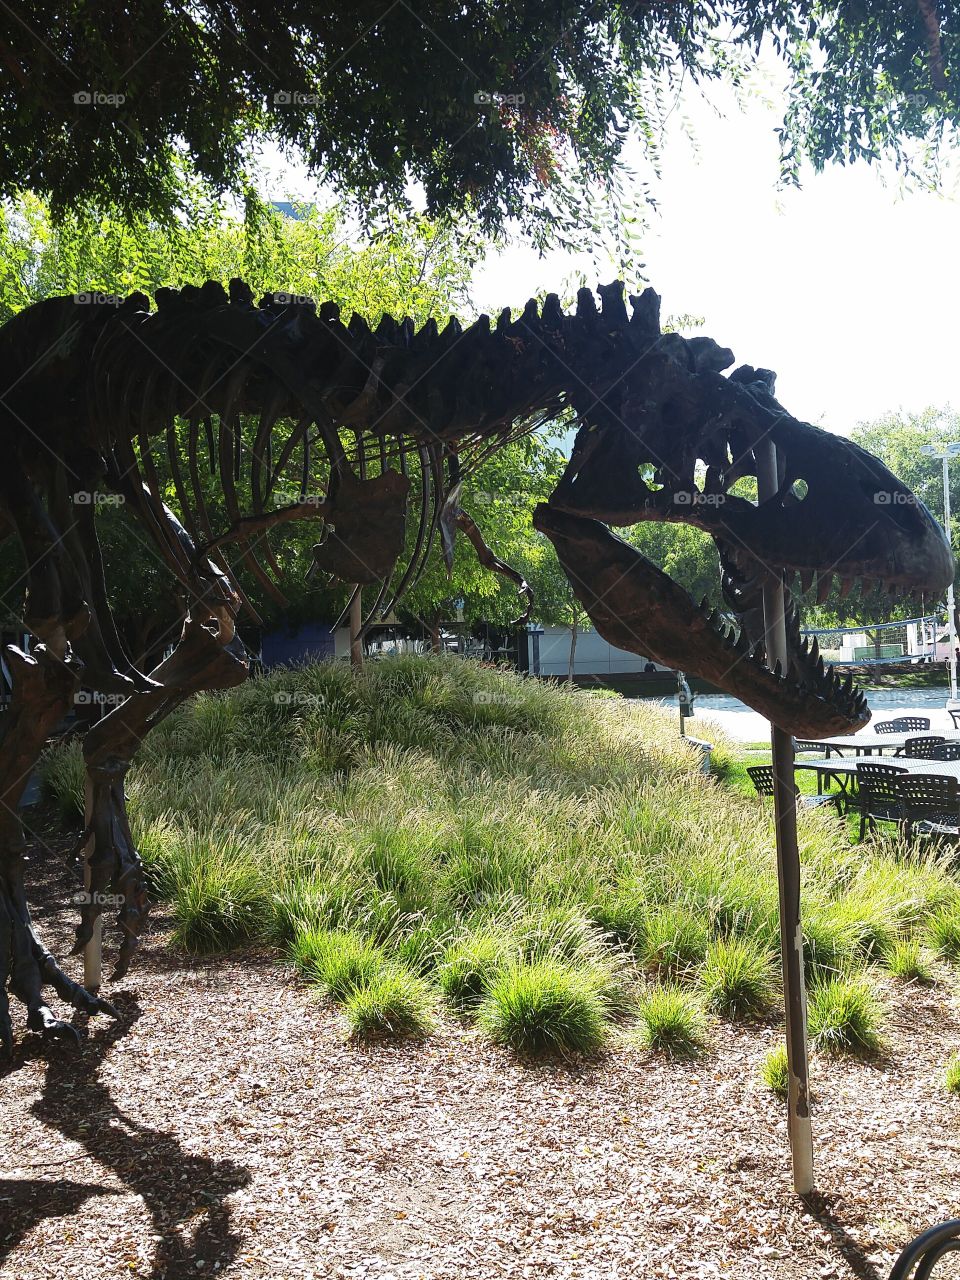 Stan the Dinosaur. This dinosaur statue is located at the Google headquarters in Mountain View , California.